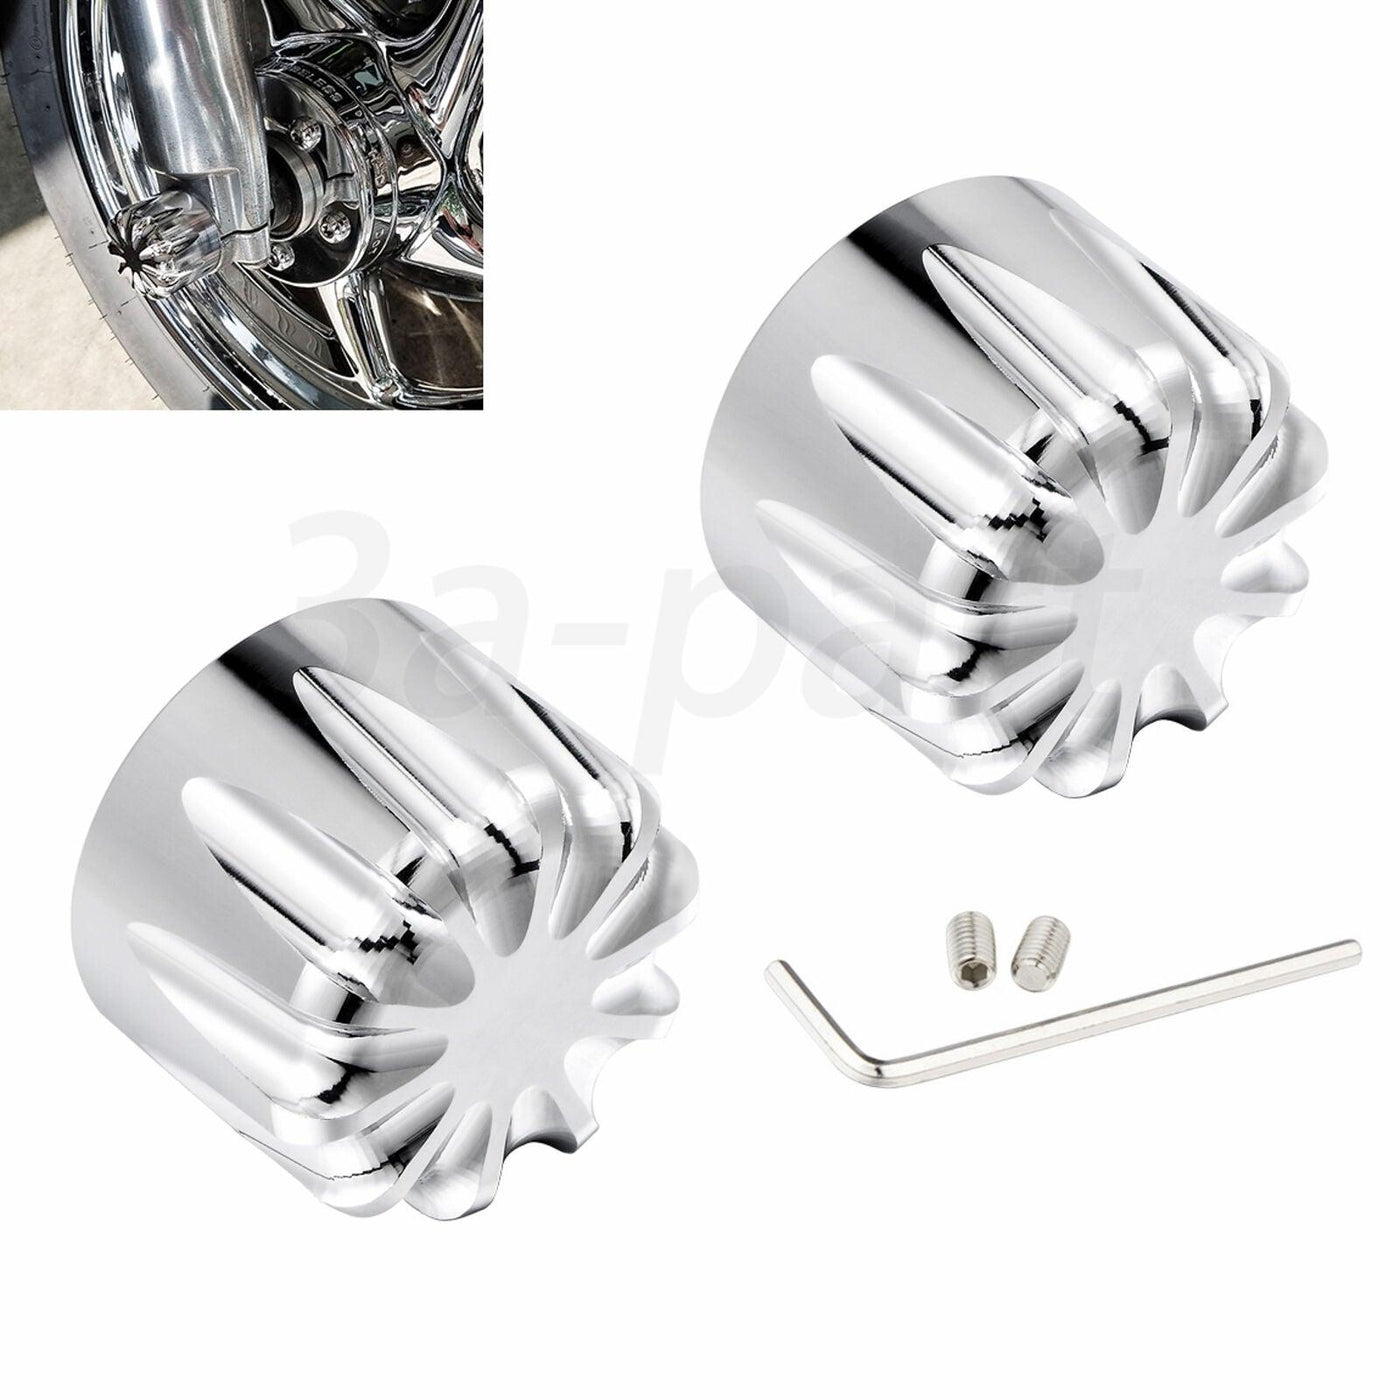 2x CNC Cut Front Chrome Axle Cap Nut Cover Fit for Harley Touring Dyna Road King - Moto Life Products